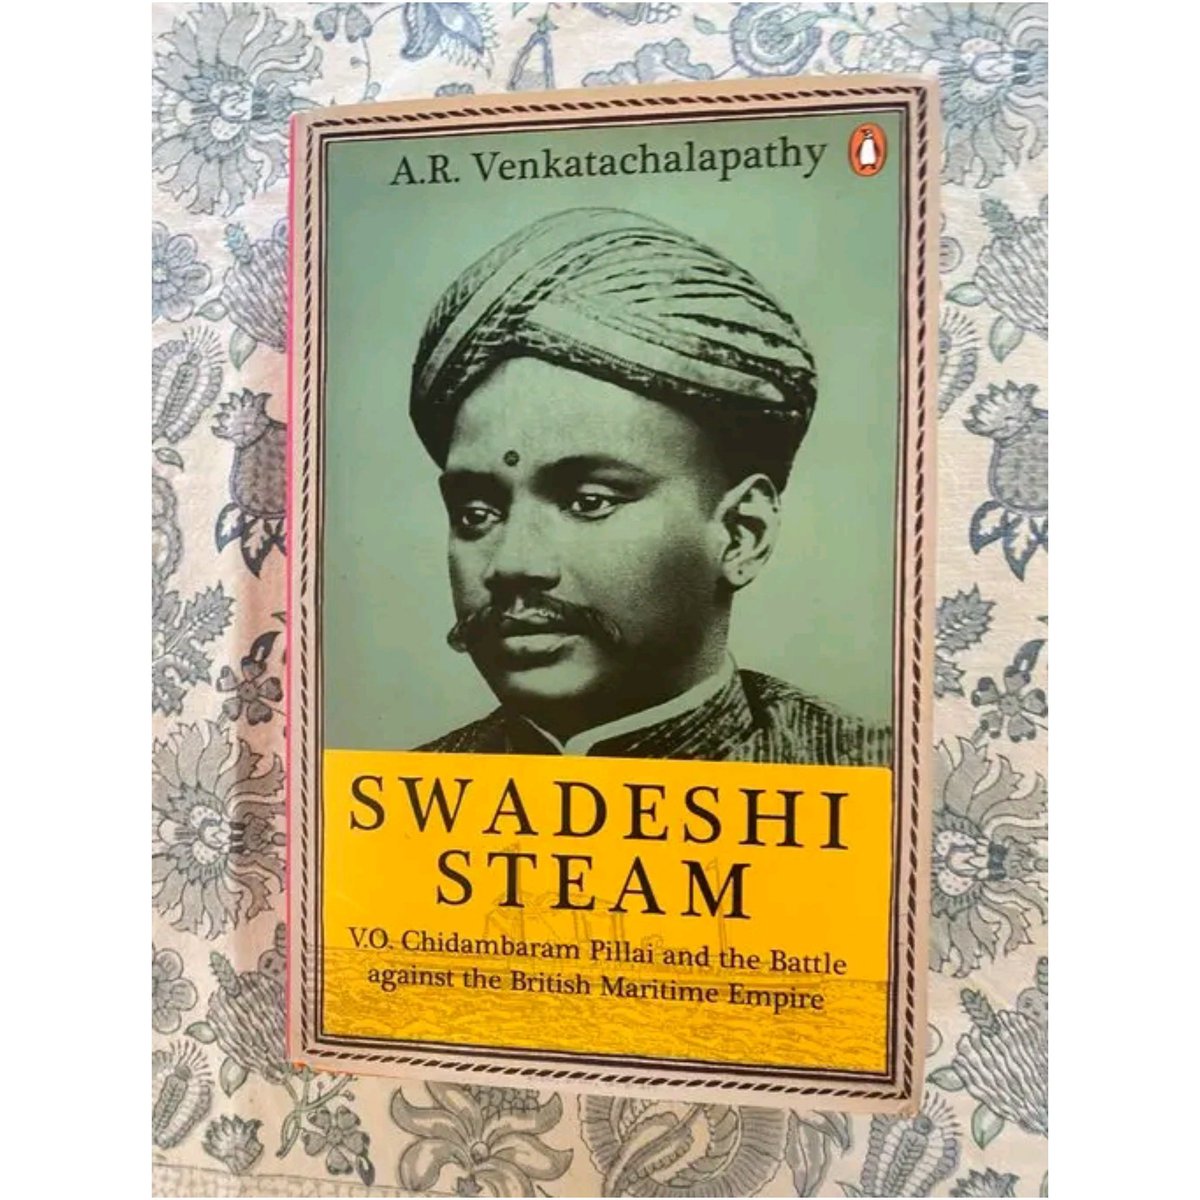 The eminent historian A.R. Venkatachalapathy will talk about his latest book 'Swadeshi Steam: V.O. Chidambaram Pillai and the Battle against the British Maritime Empire' tomorrow at JUP at 6pm! #event #swadeshi #history #jadavpuruniversitypress #publishersofx